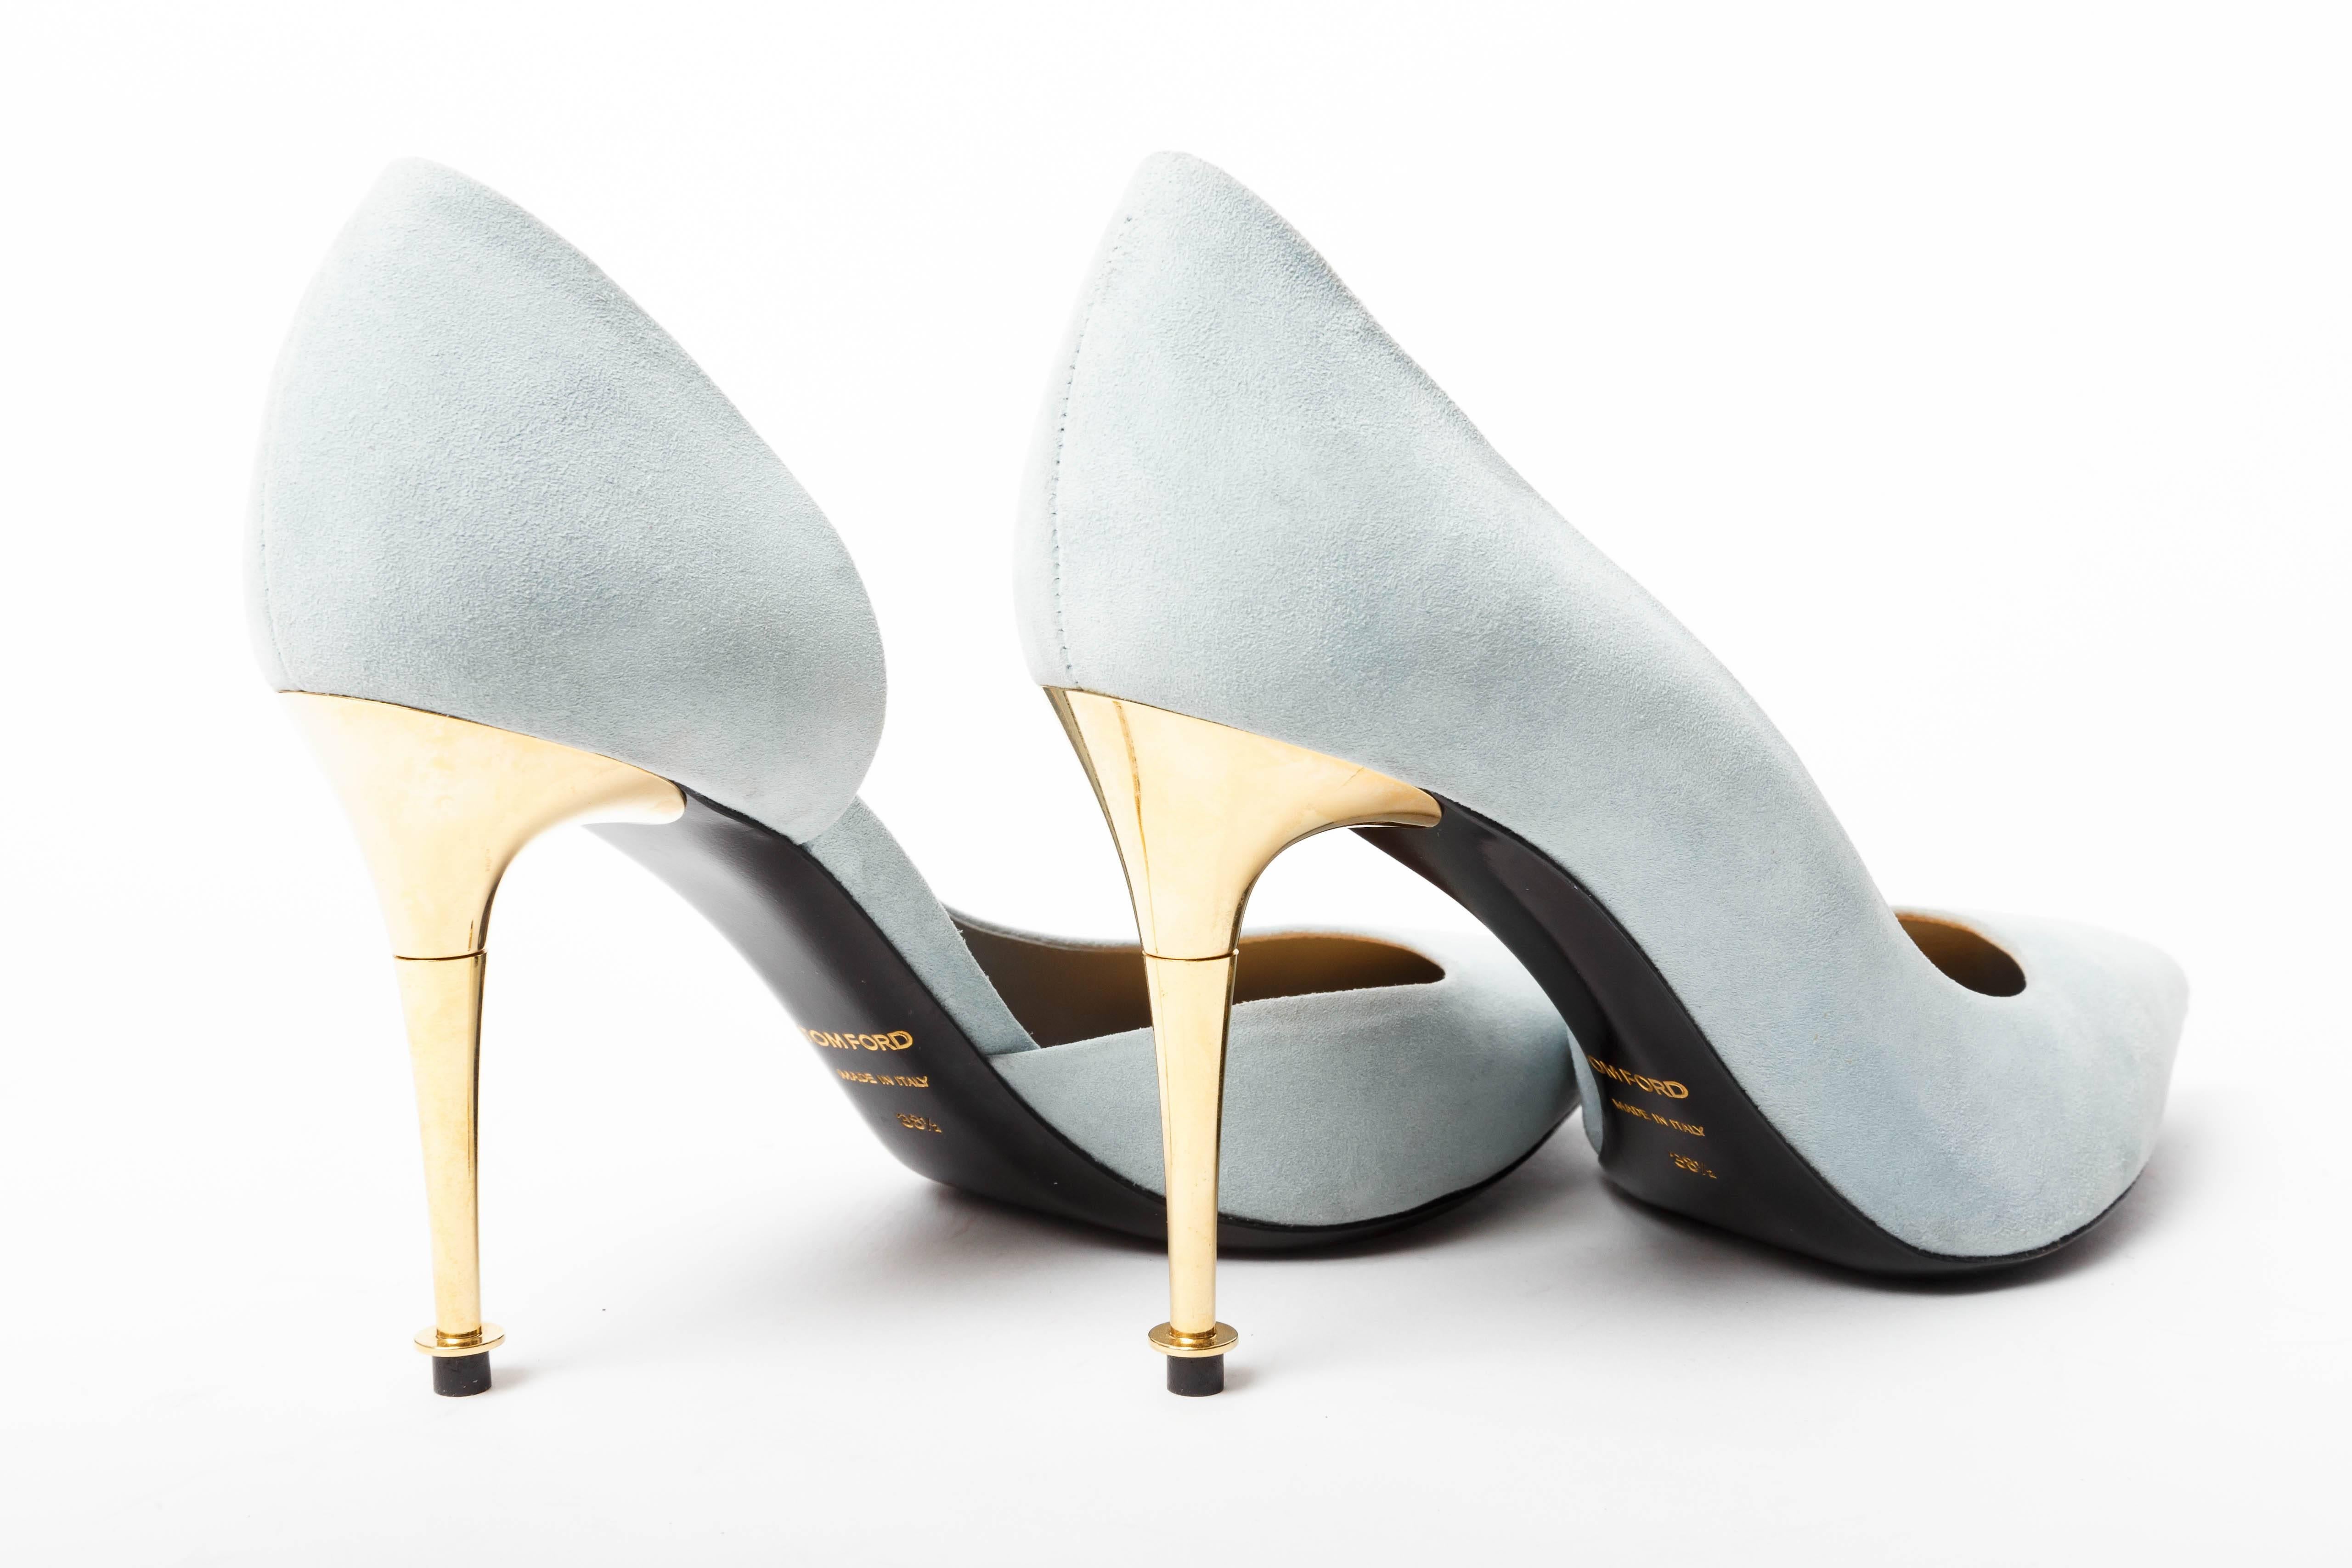 Tom Ford Powder Blue Suede Pumps With Spike Heel - New With Box - 38.5 / 8.5 1